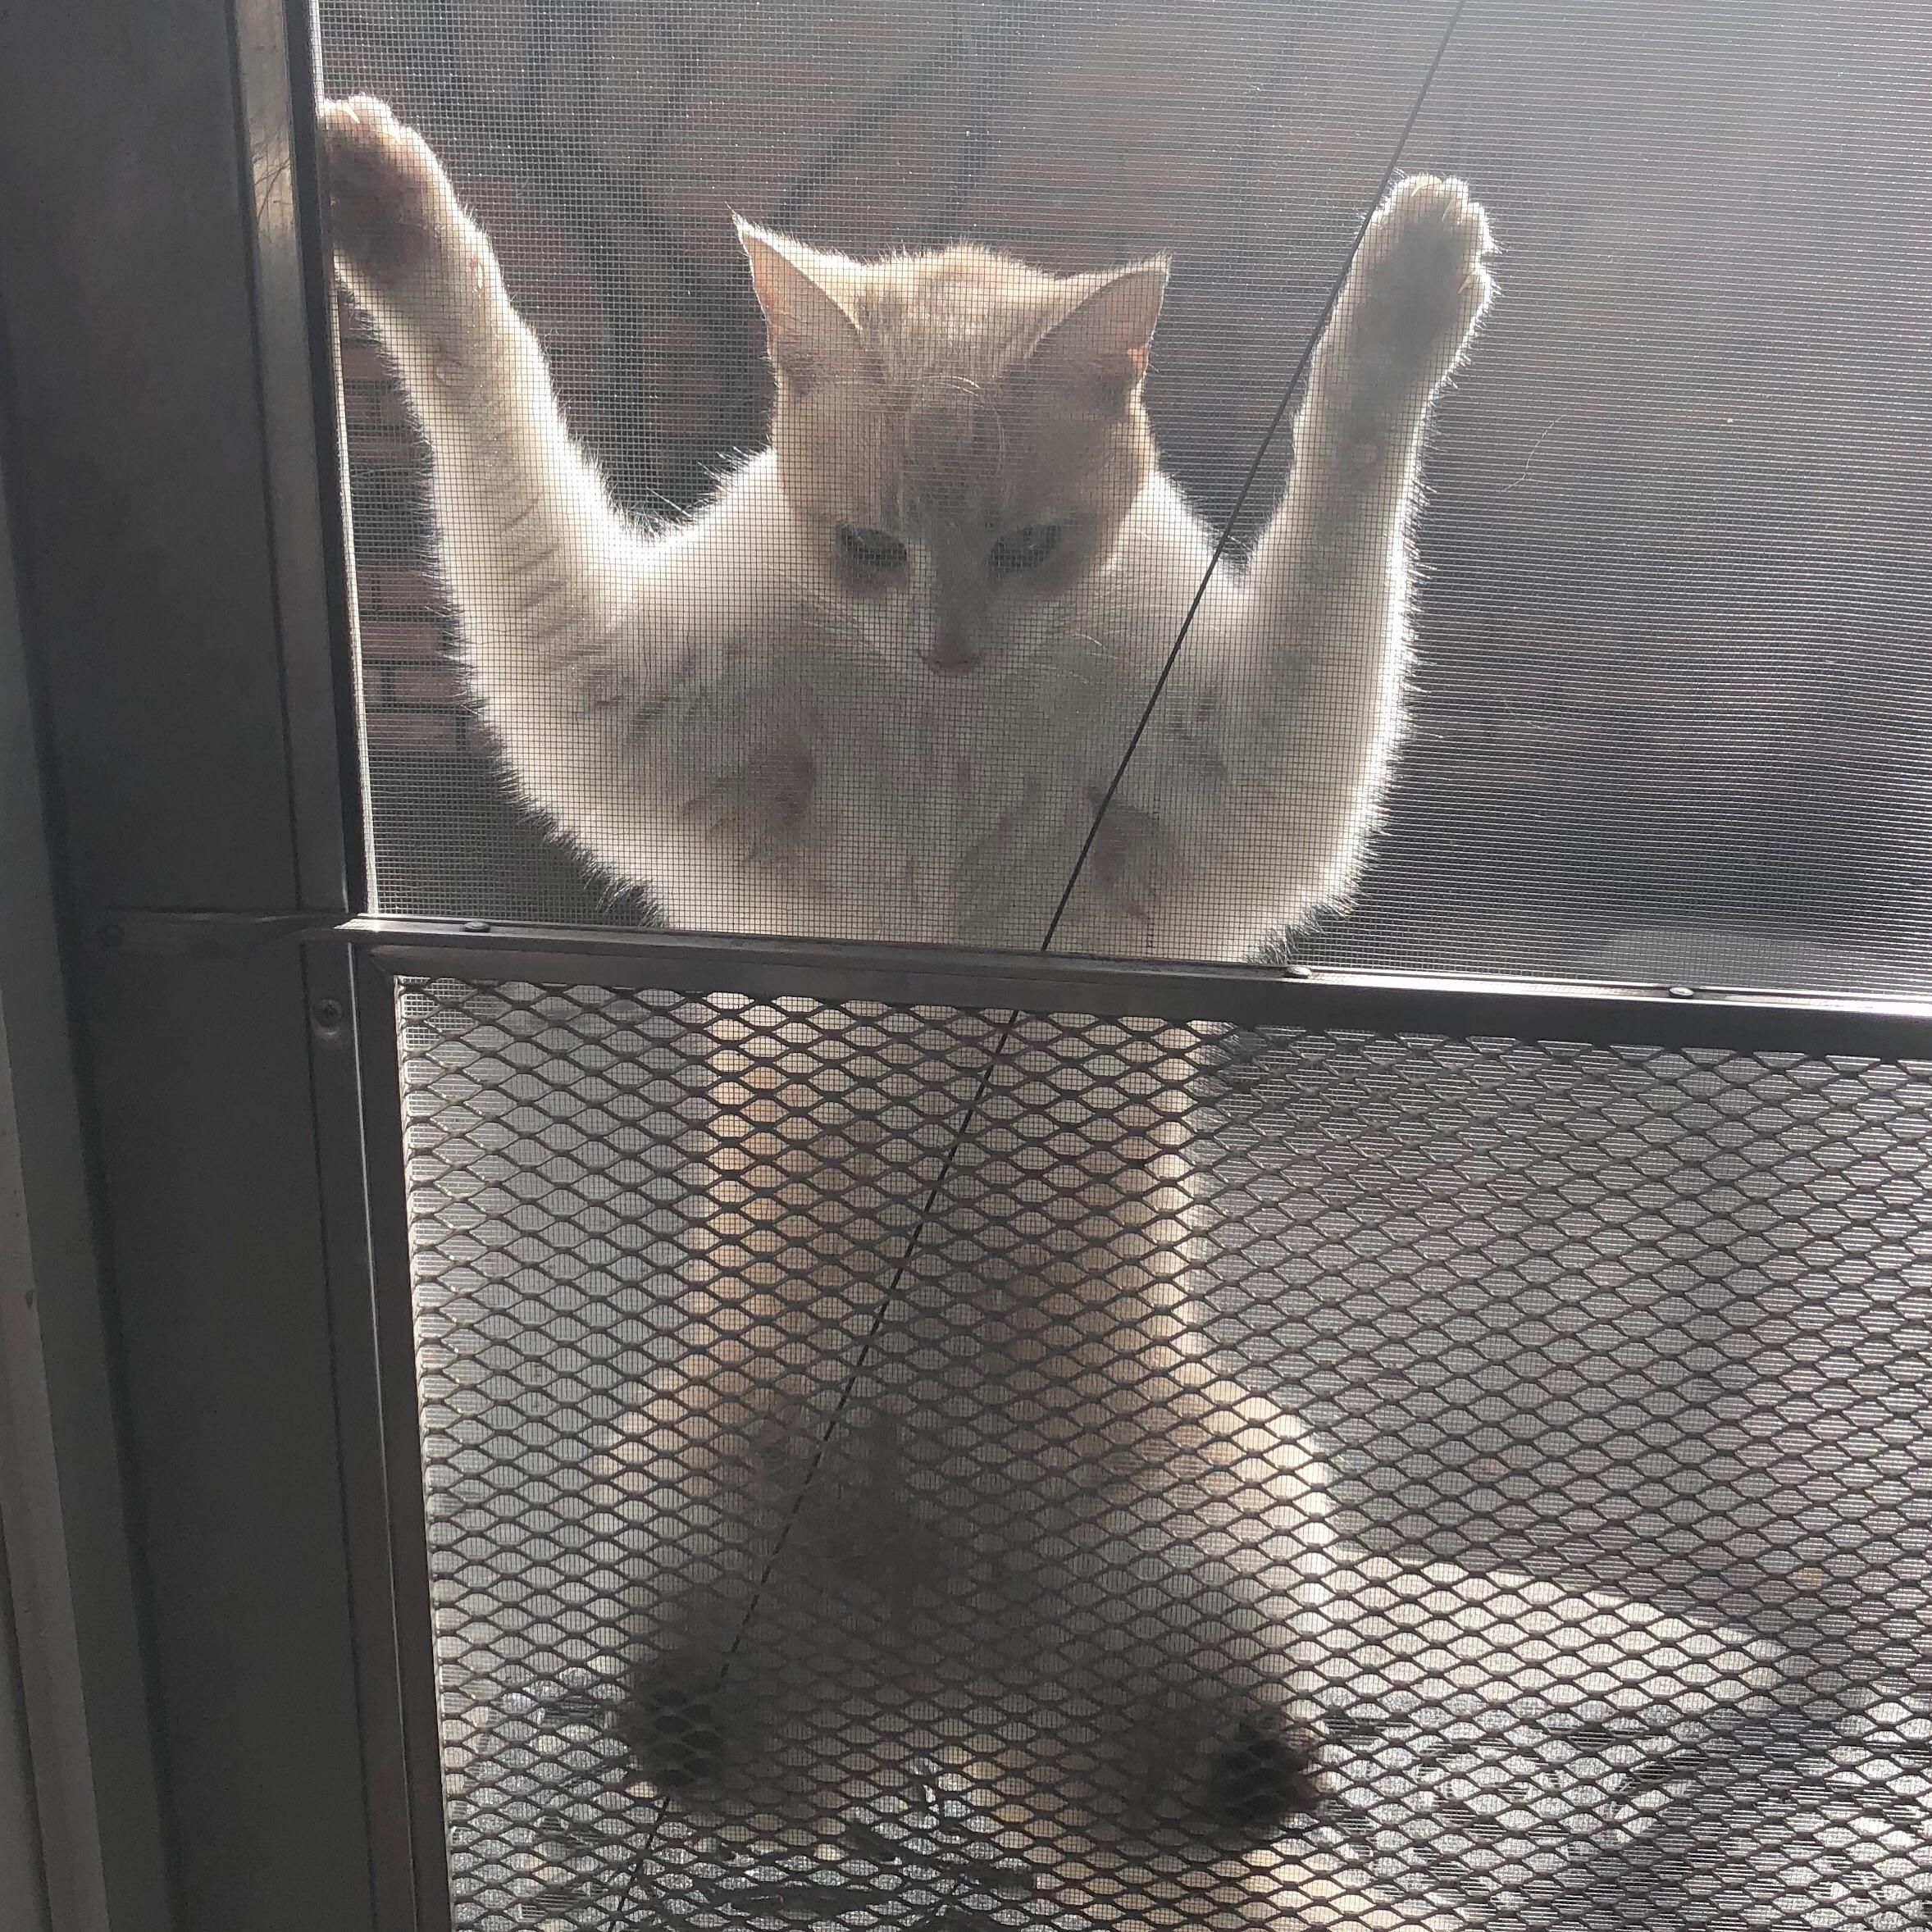 Pennywise in Cat form. I think he wants to come inside